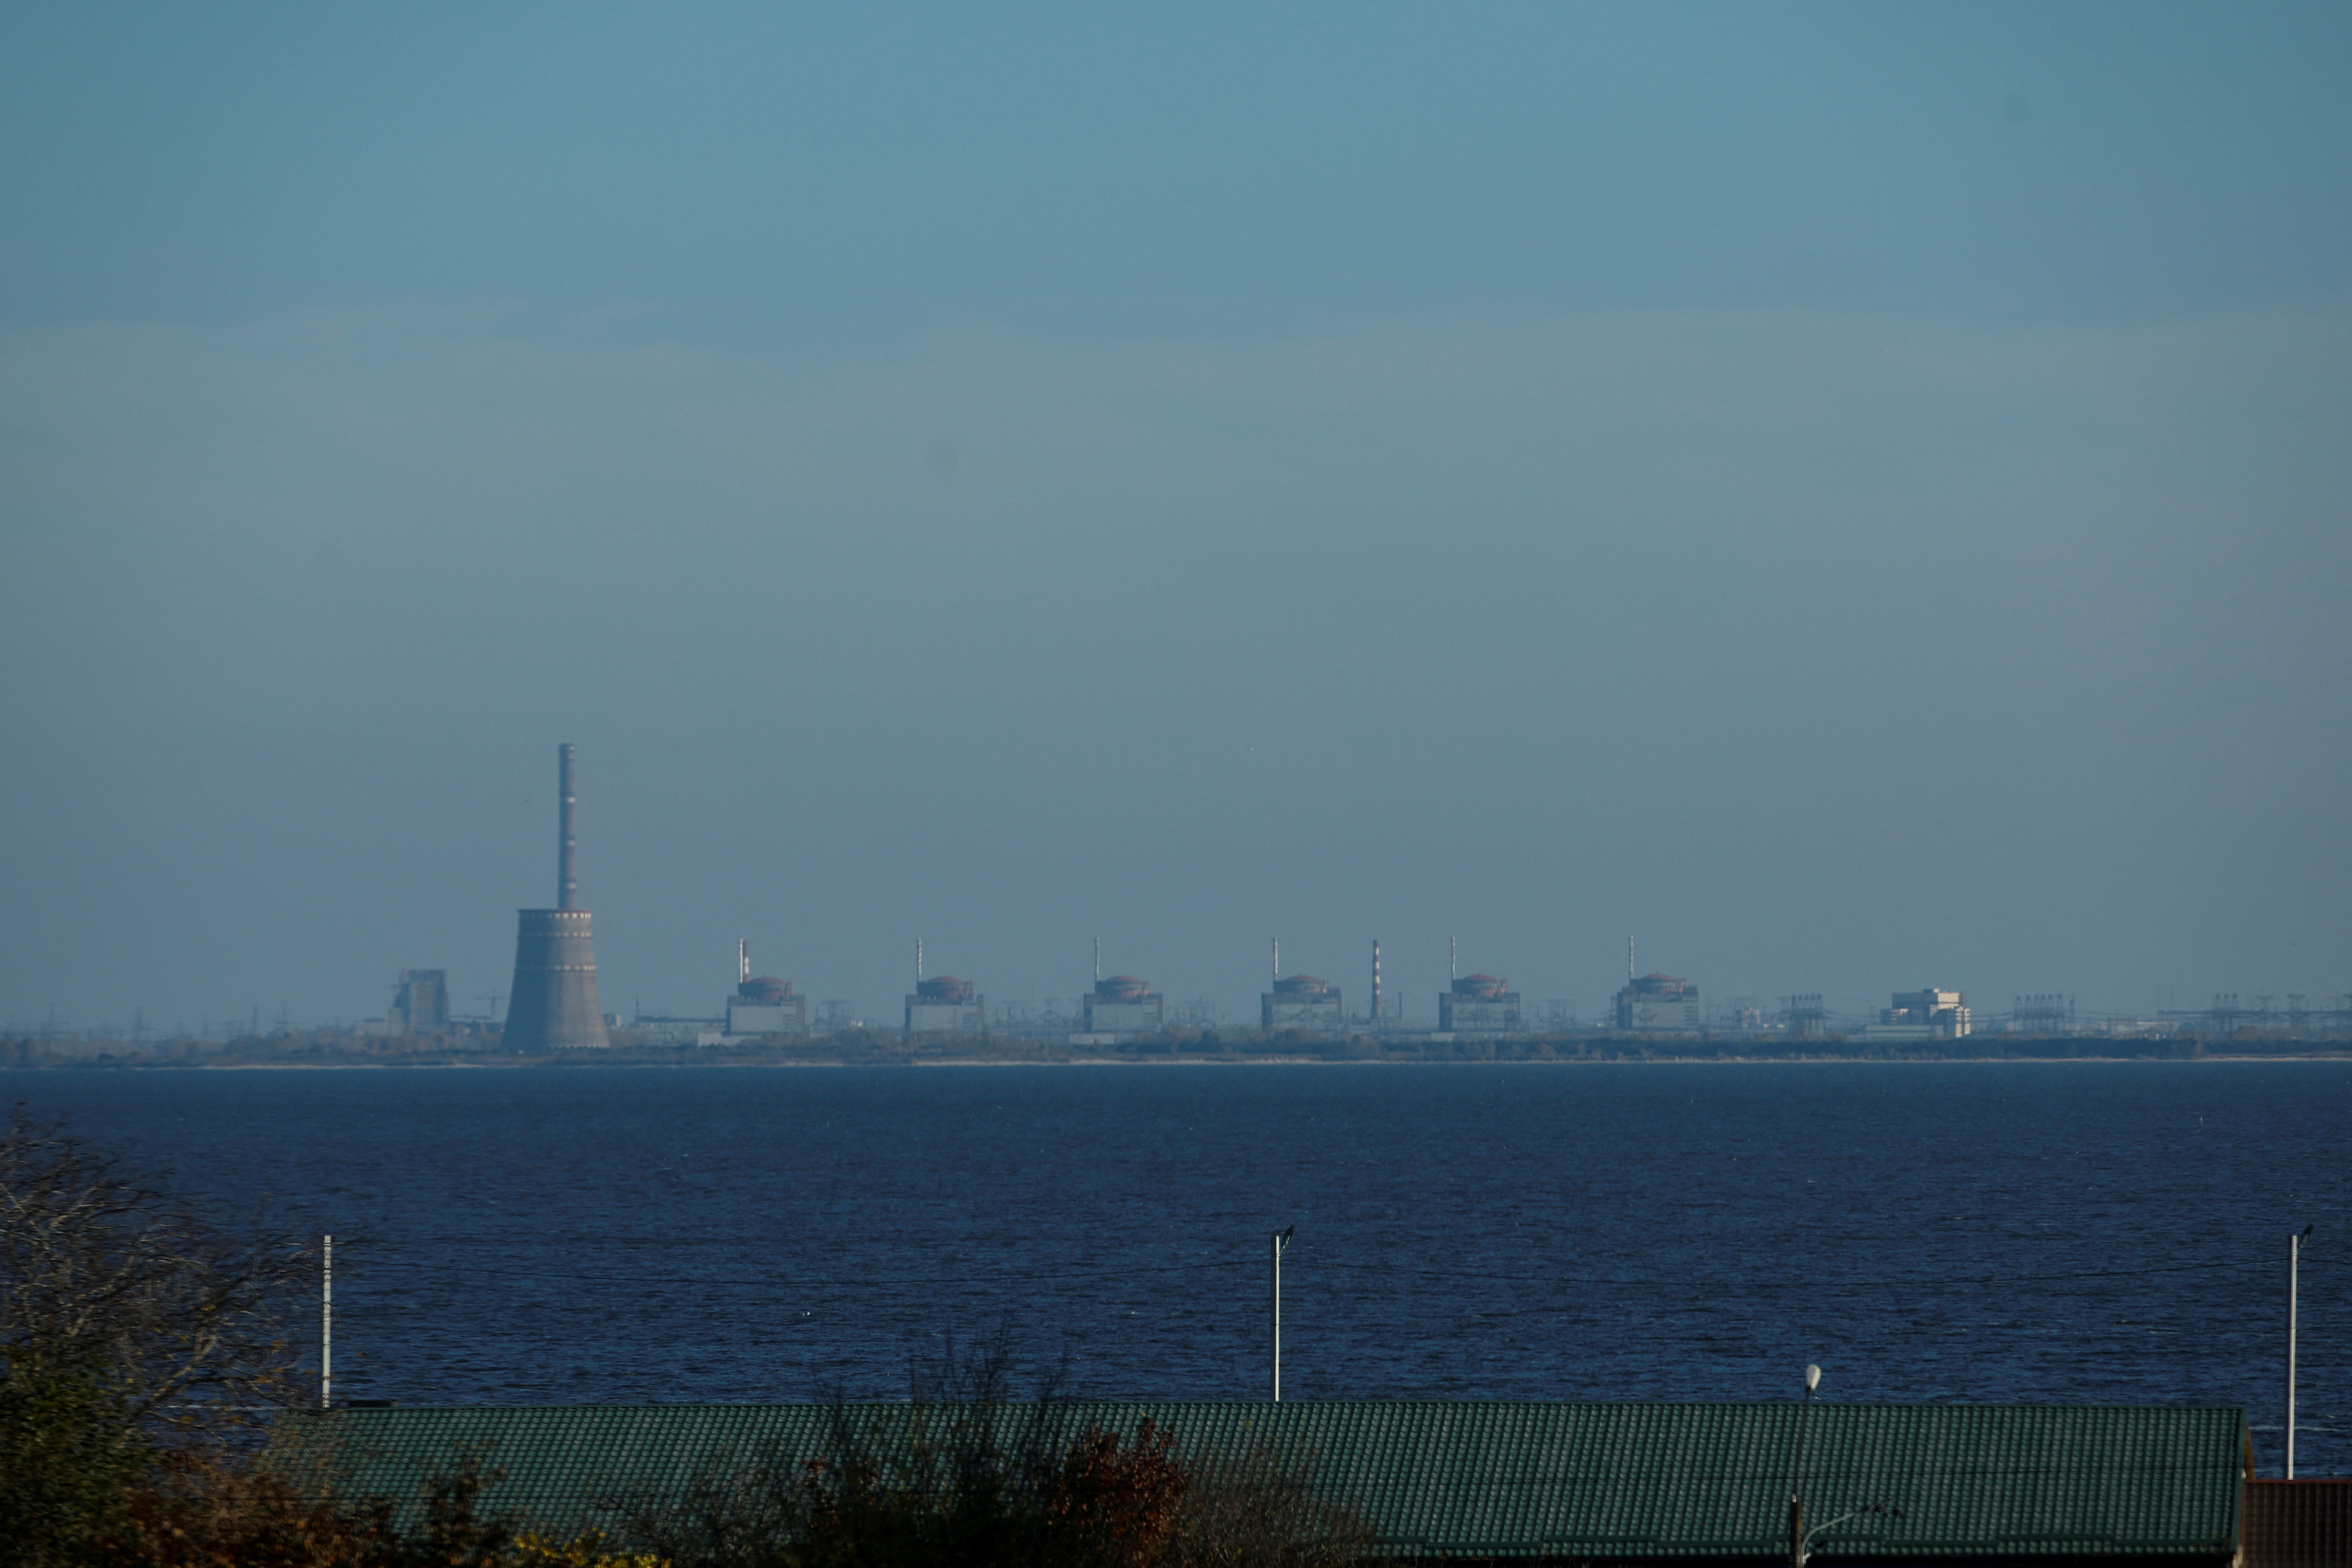 The view shows the Zaporizhzhia Nuclear Power Plant from the city of Nikopol